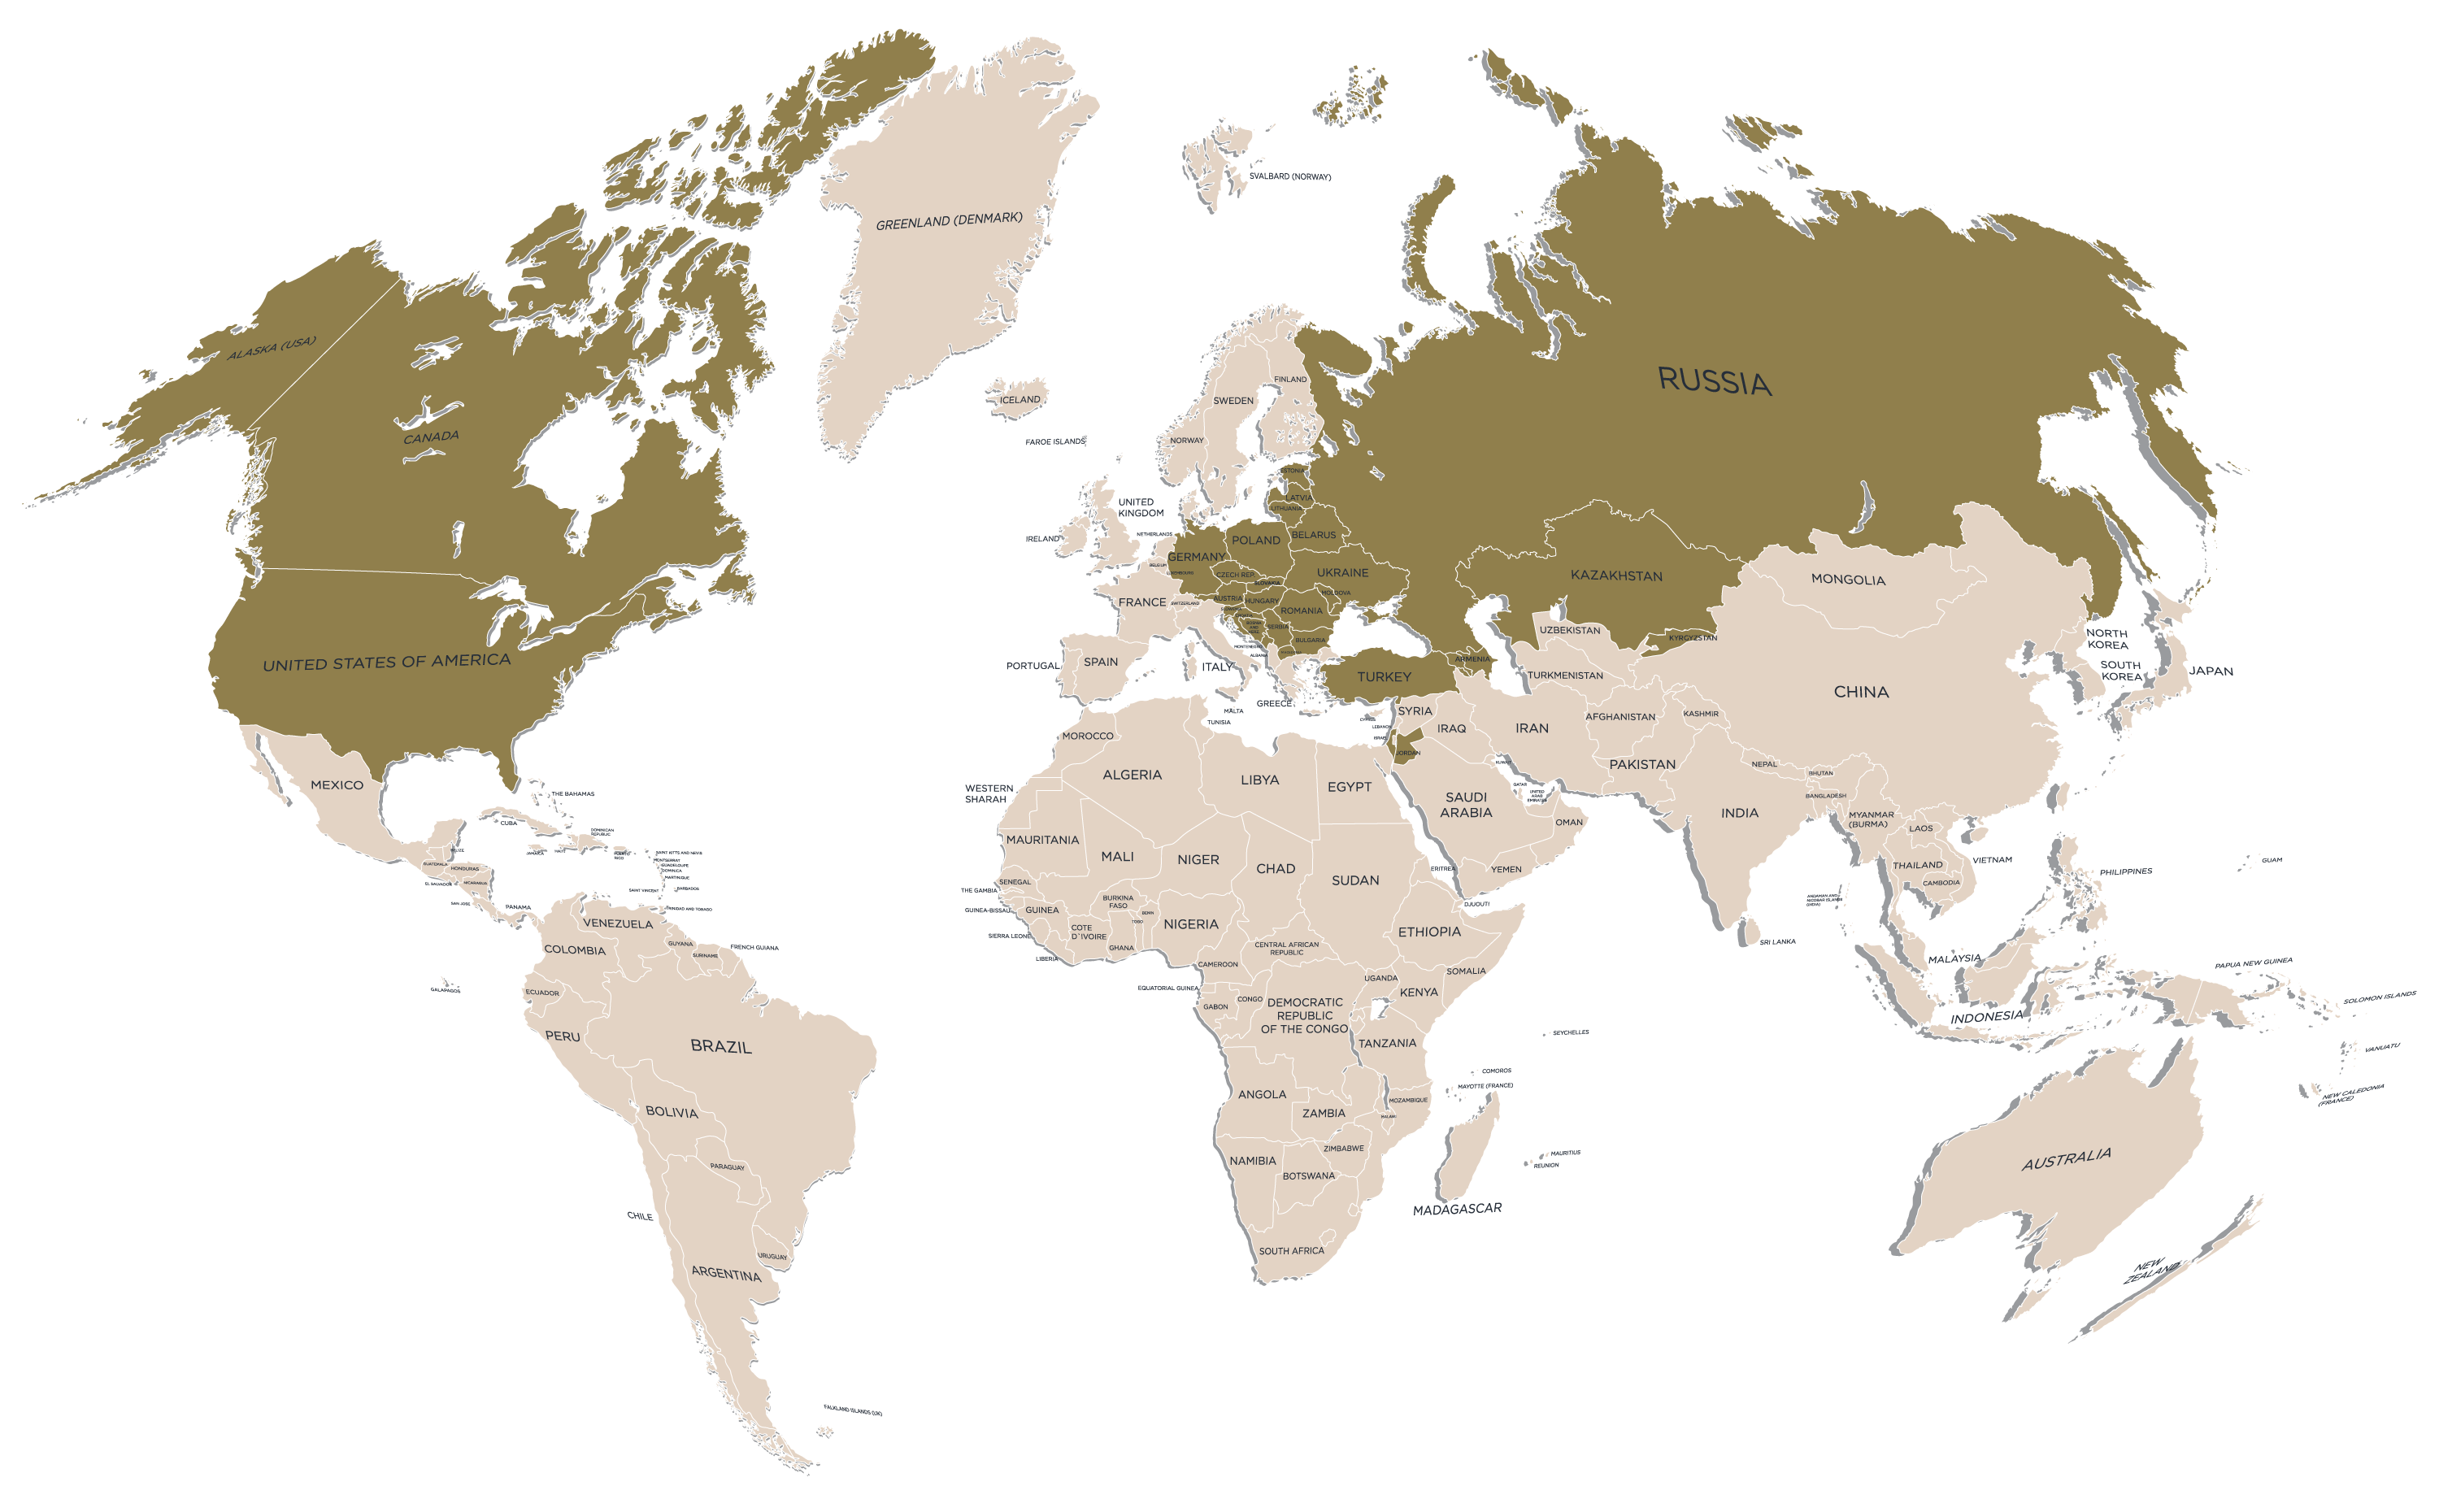 Family Tree Ltd. - map of countries we research in